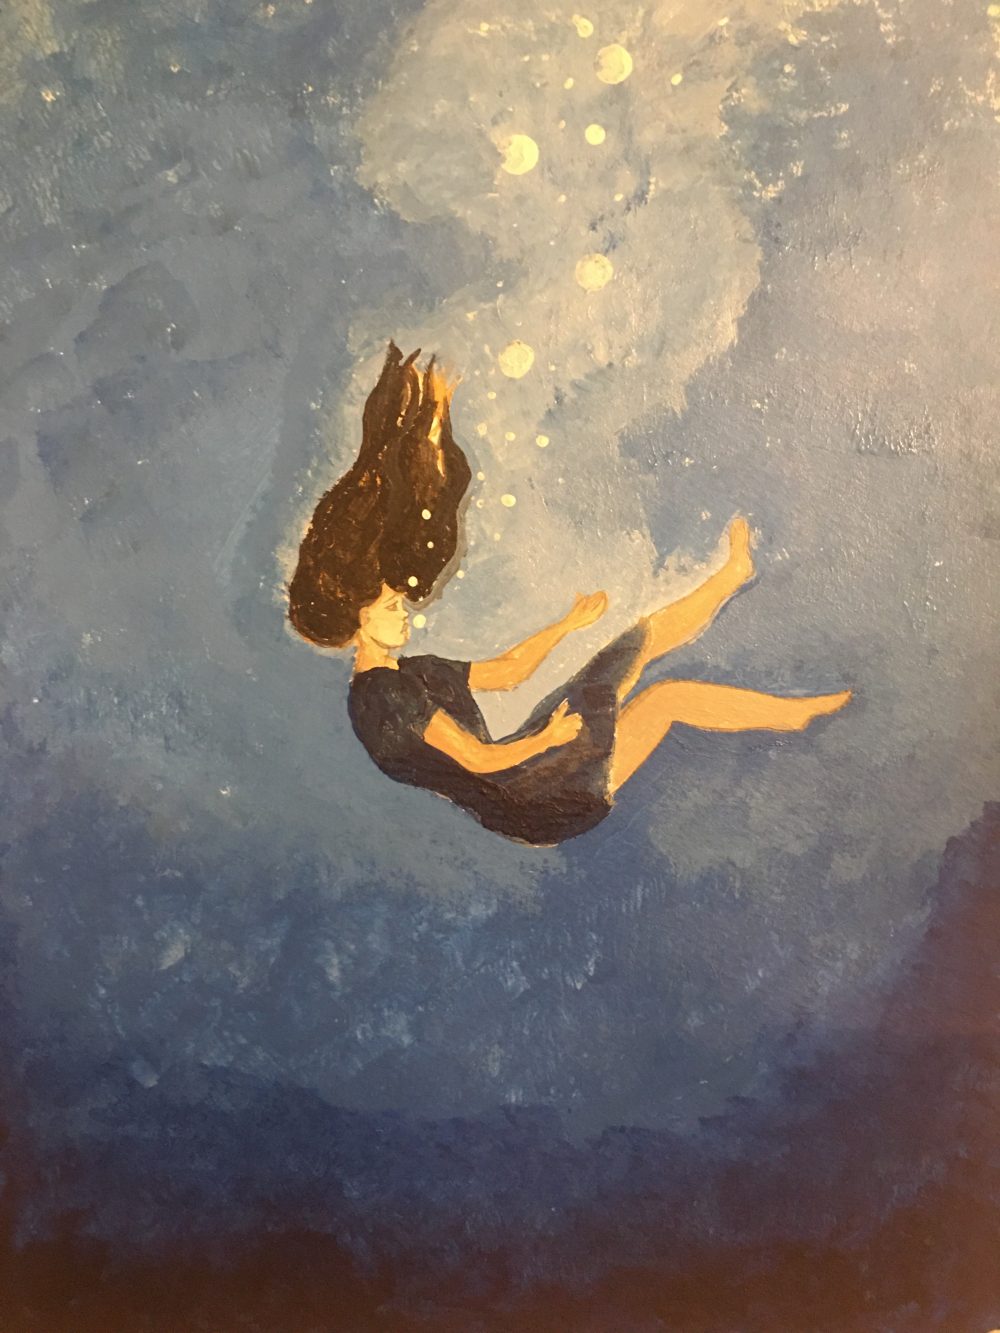 Oil painting of a girl drowning with no sign of struggle, acceptance of the end with nothing to hold on to.